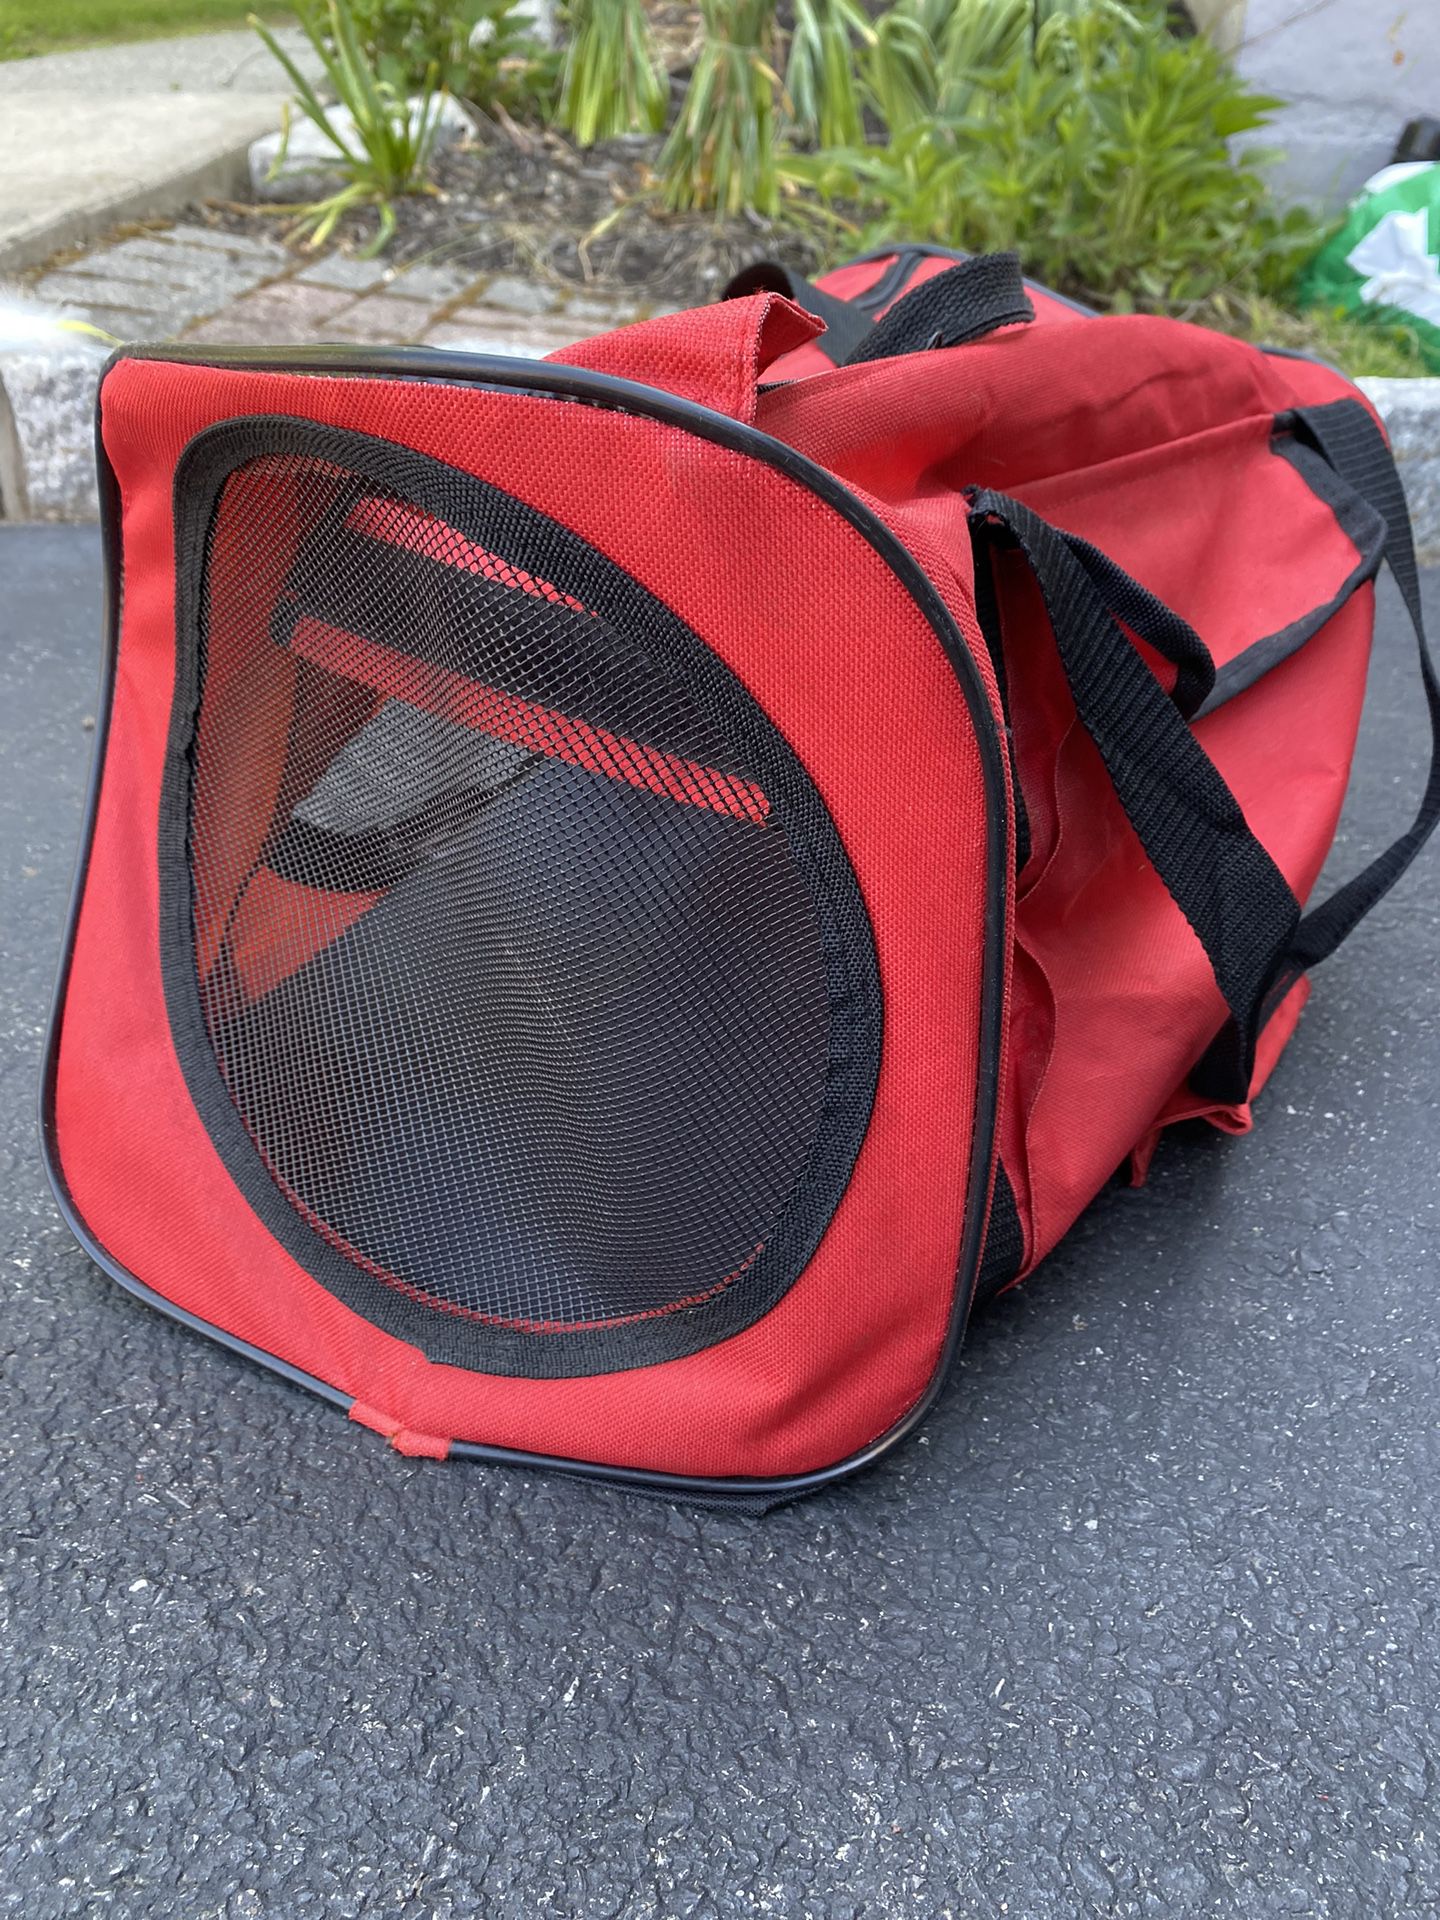 Red Small Soft Sided 360 Degree View Pet Store Cat Dog Animal Transport Carrier 19” long x 11” high’ x 11” wide